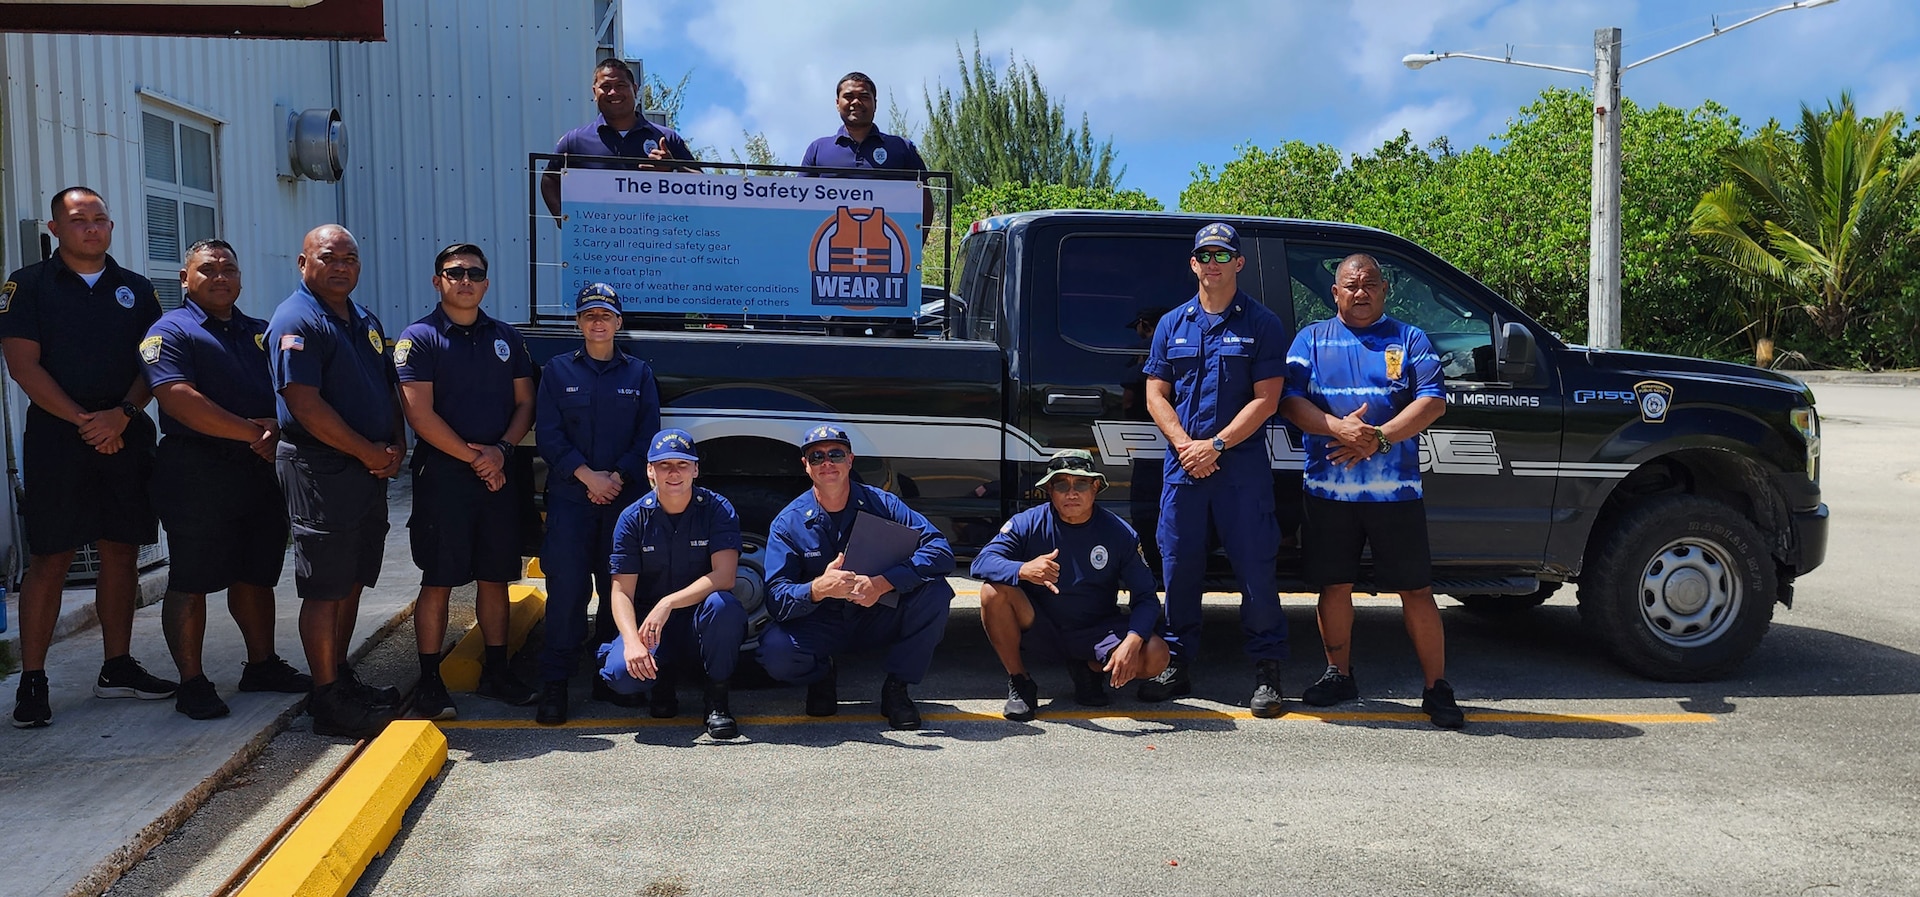 USCGC Frederick Hatch (WPC 1143) recognizes boating safety in Northern Mariana Islands